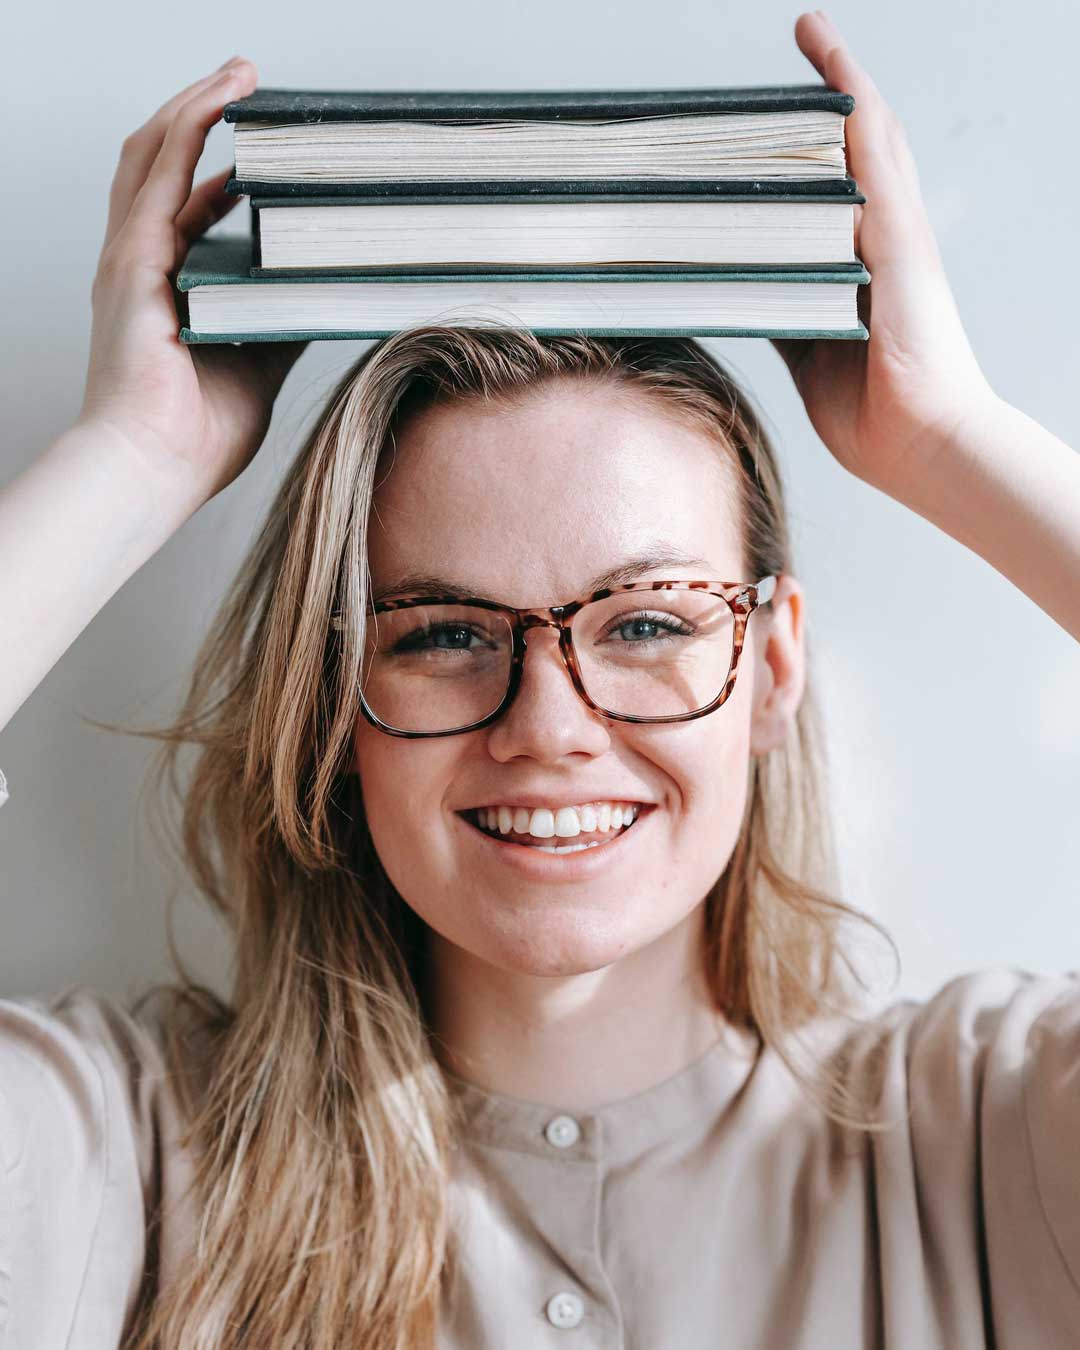 Woman with blonde hair wearing oversized tortoise eyeglasses holding books above her head